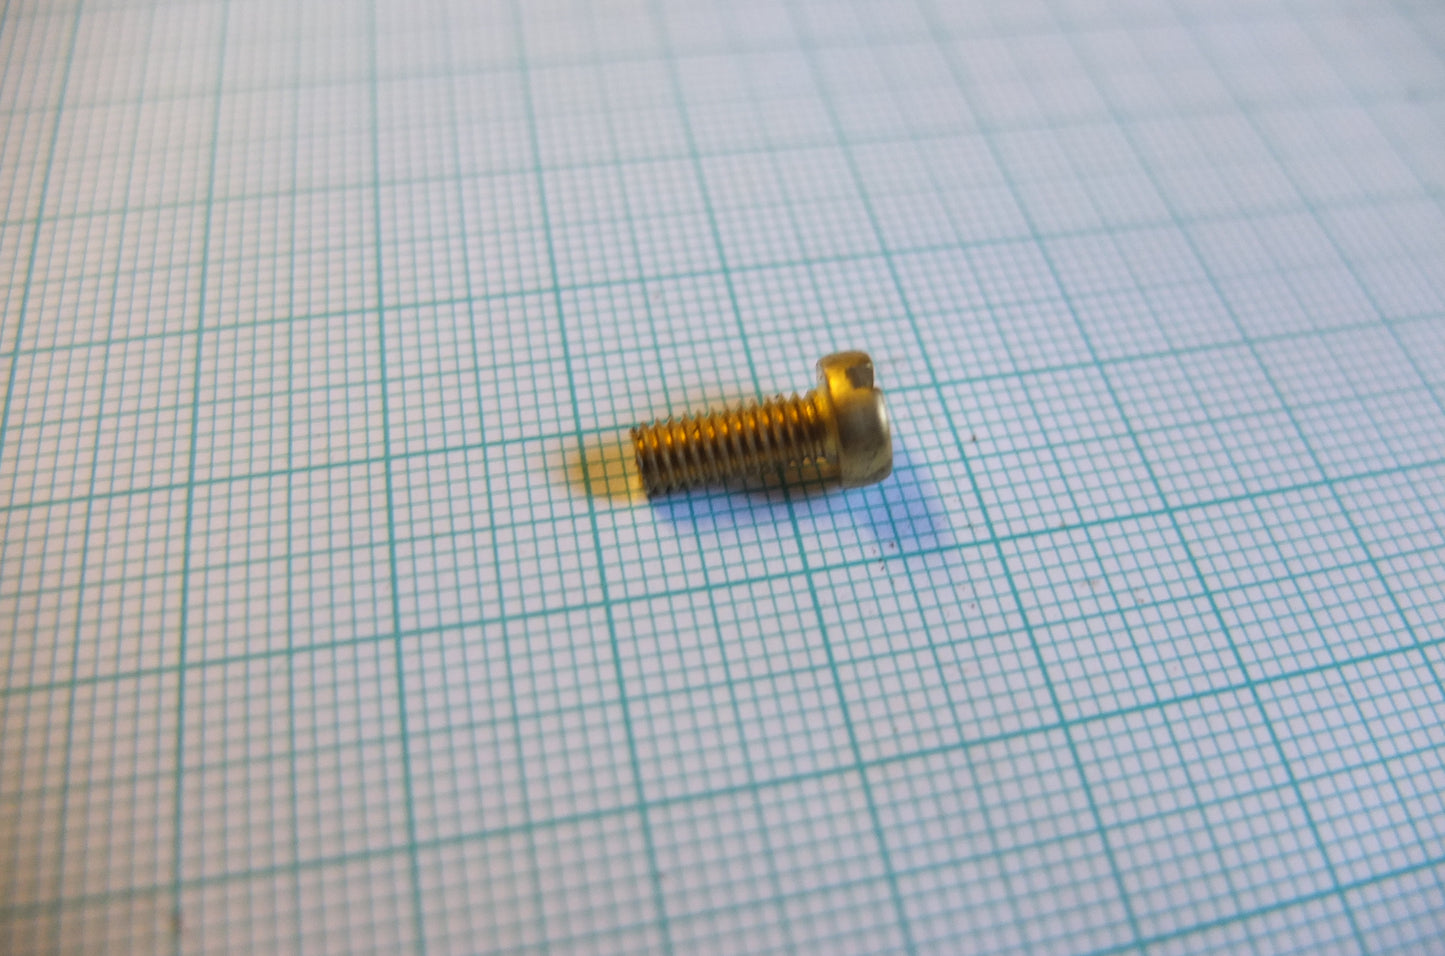 P11/040A Distributor rotor carrier screw